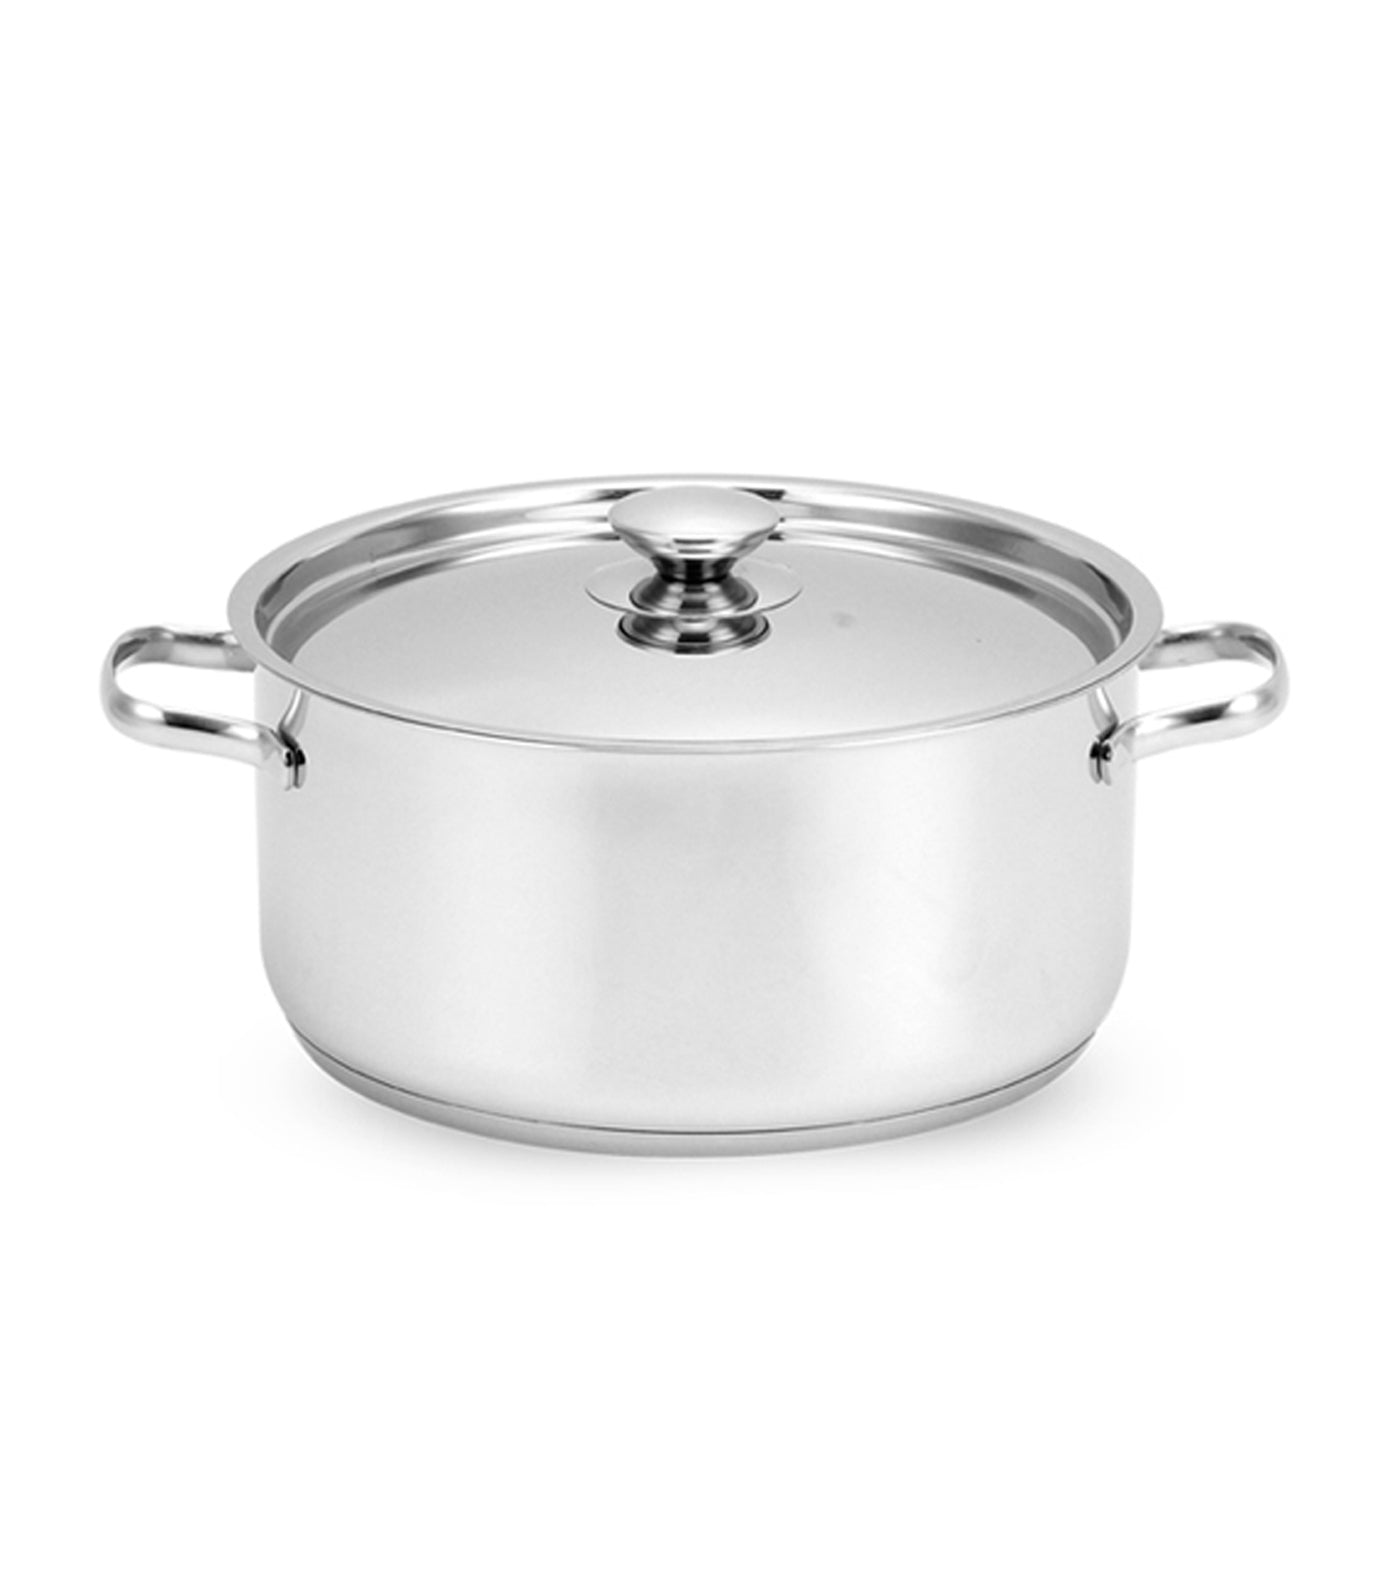 lifestyle silver stainless steel casserole